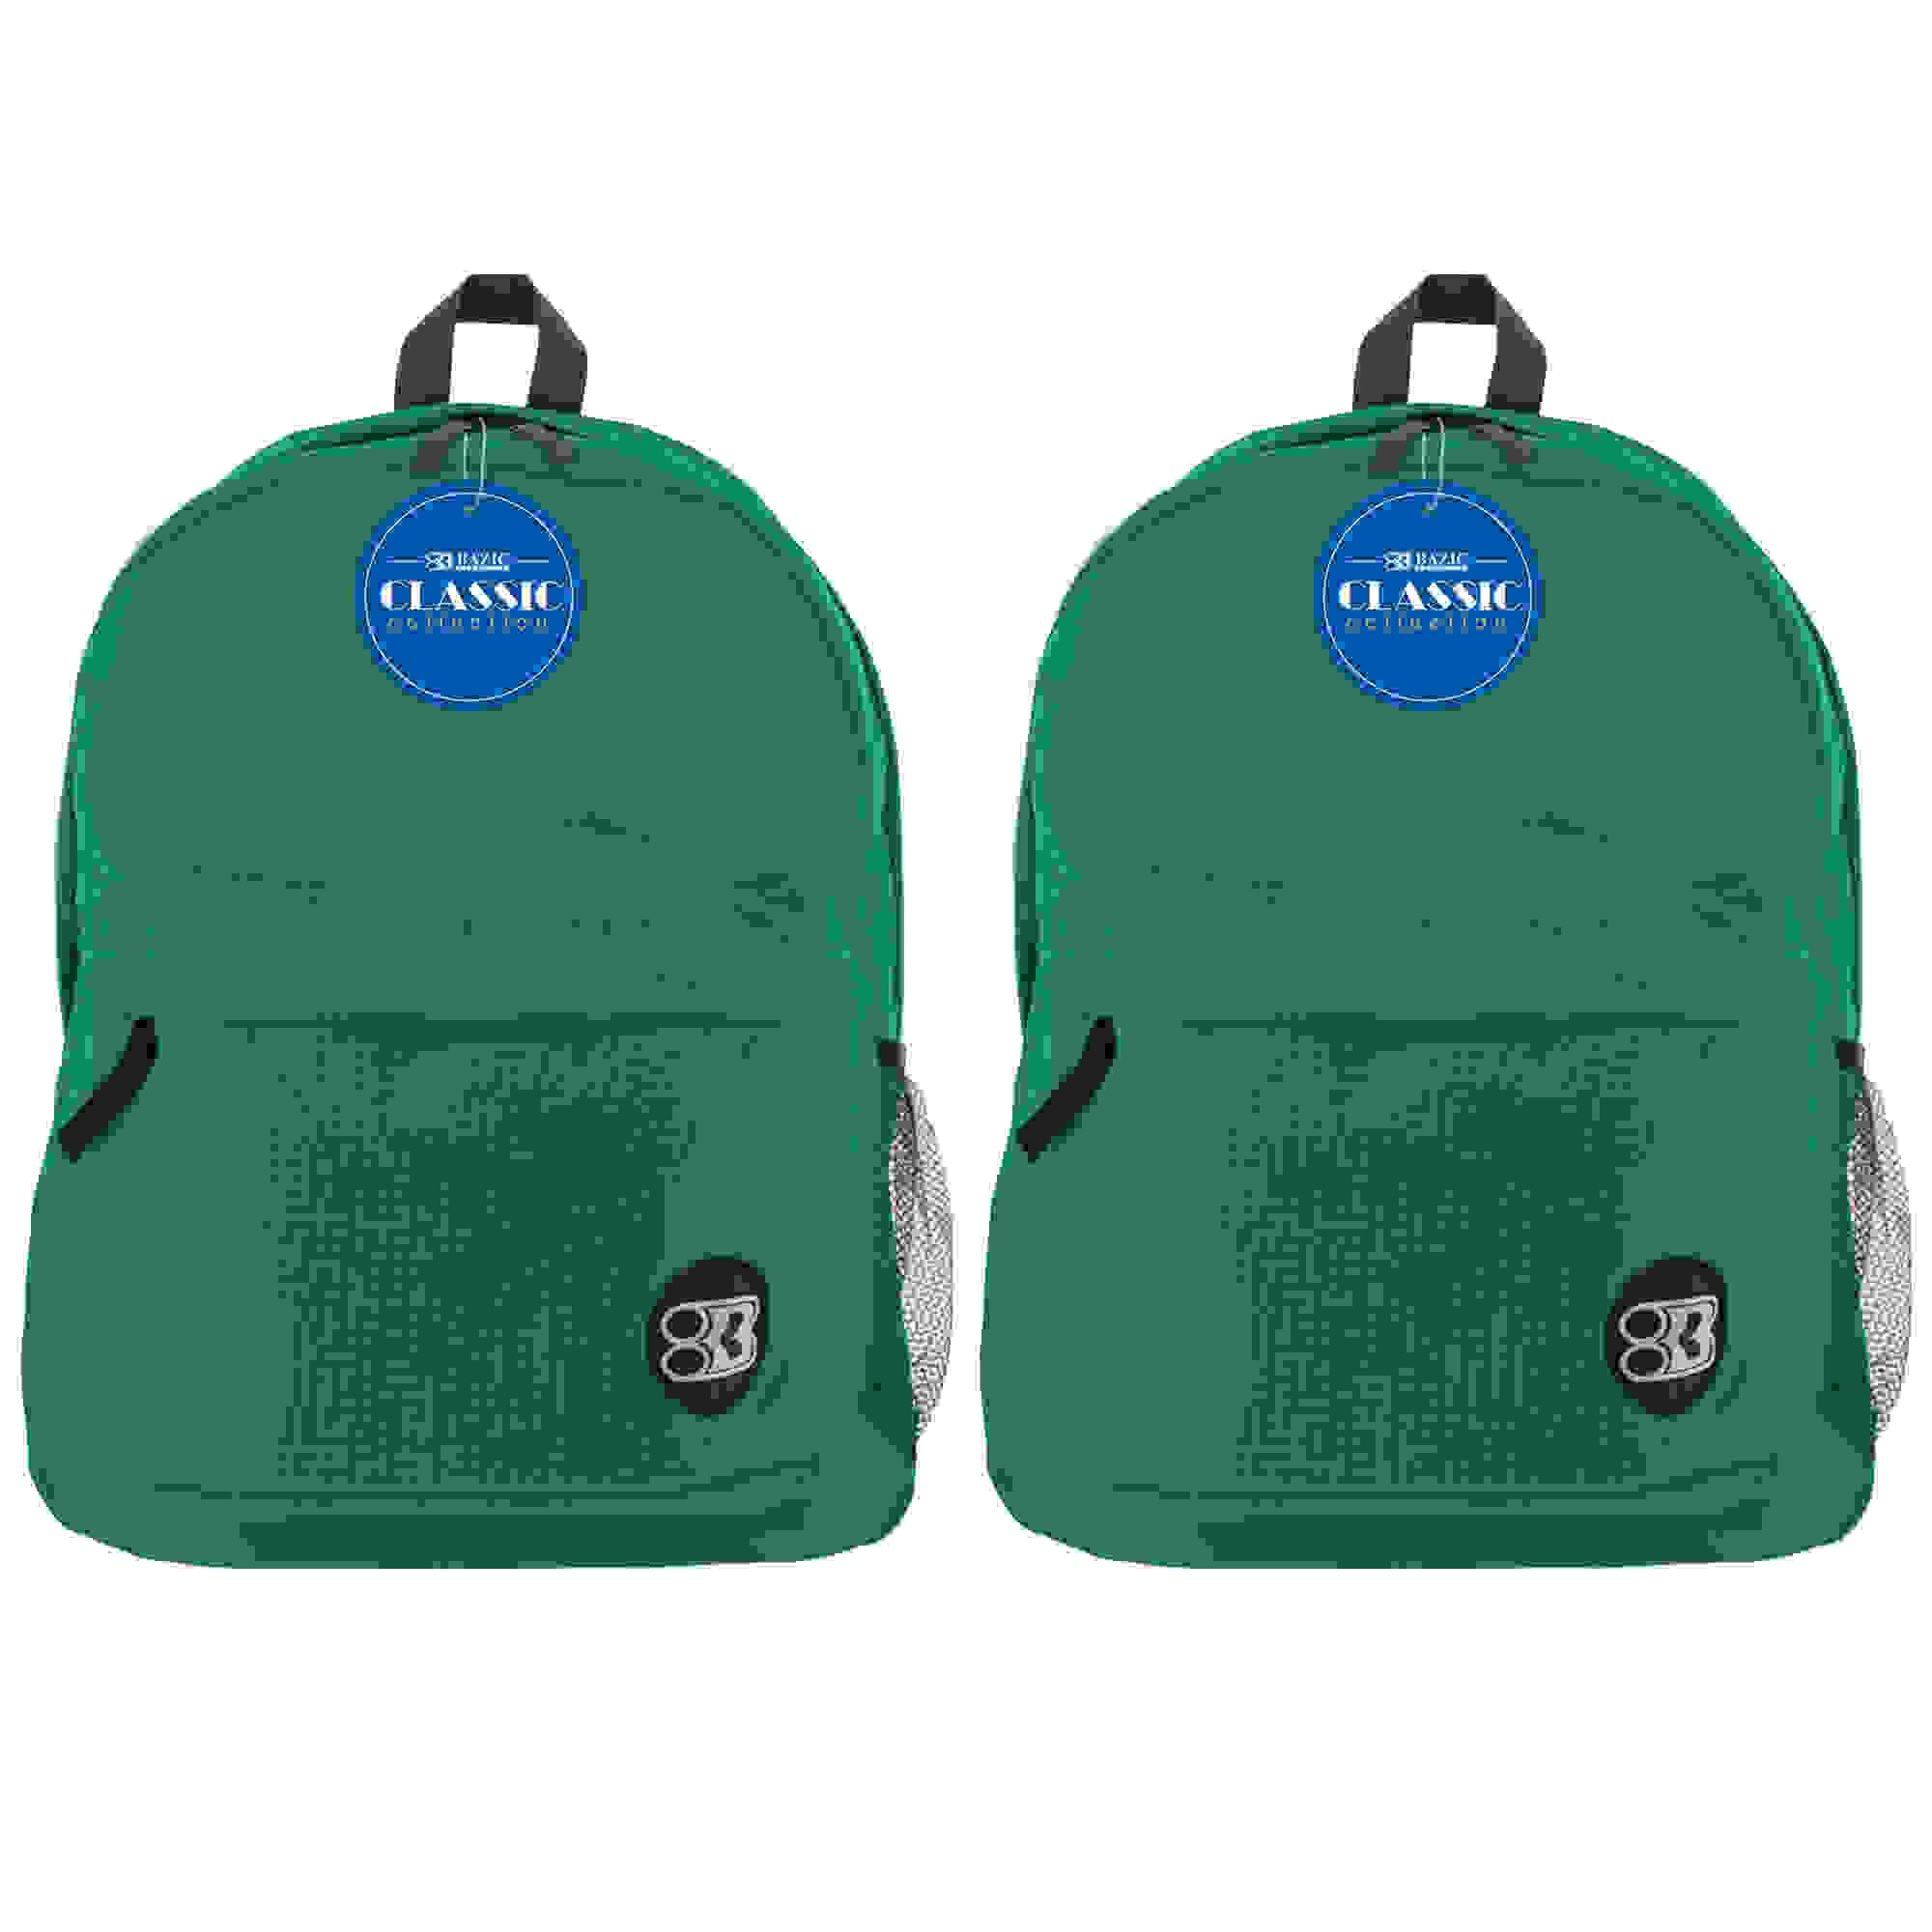 Classic Backpack 17" Green, Pack of 2